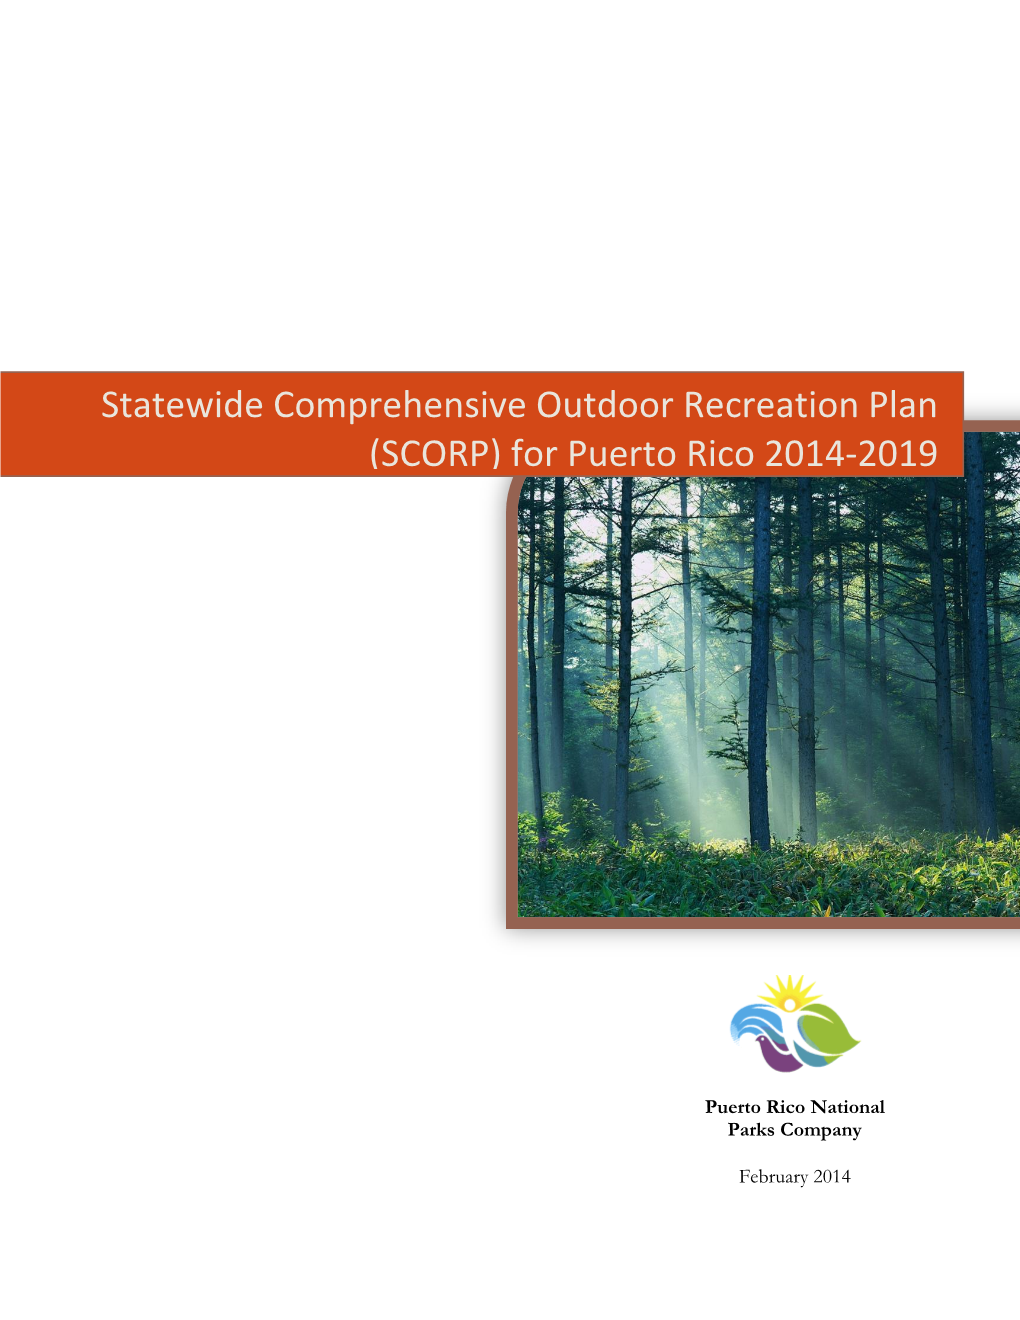 Statewide Comprehensive Outdoor Recreation Plan (SCORP) for Puerto Rico 2014-2019